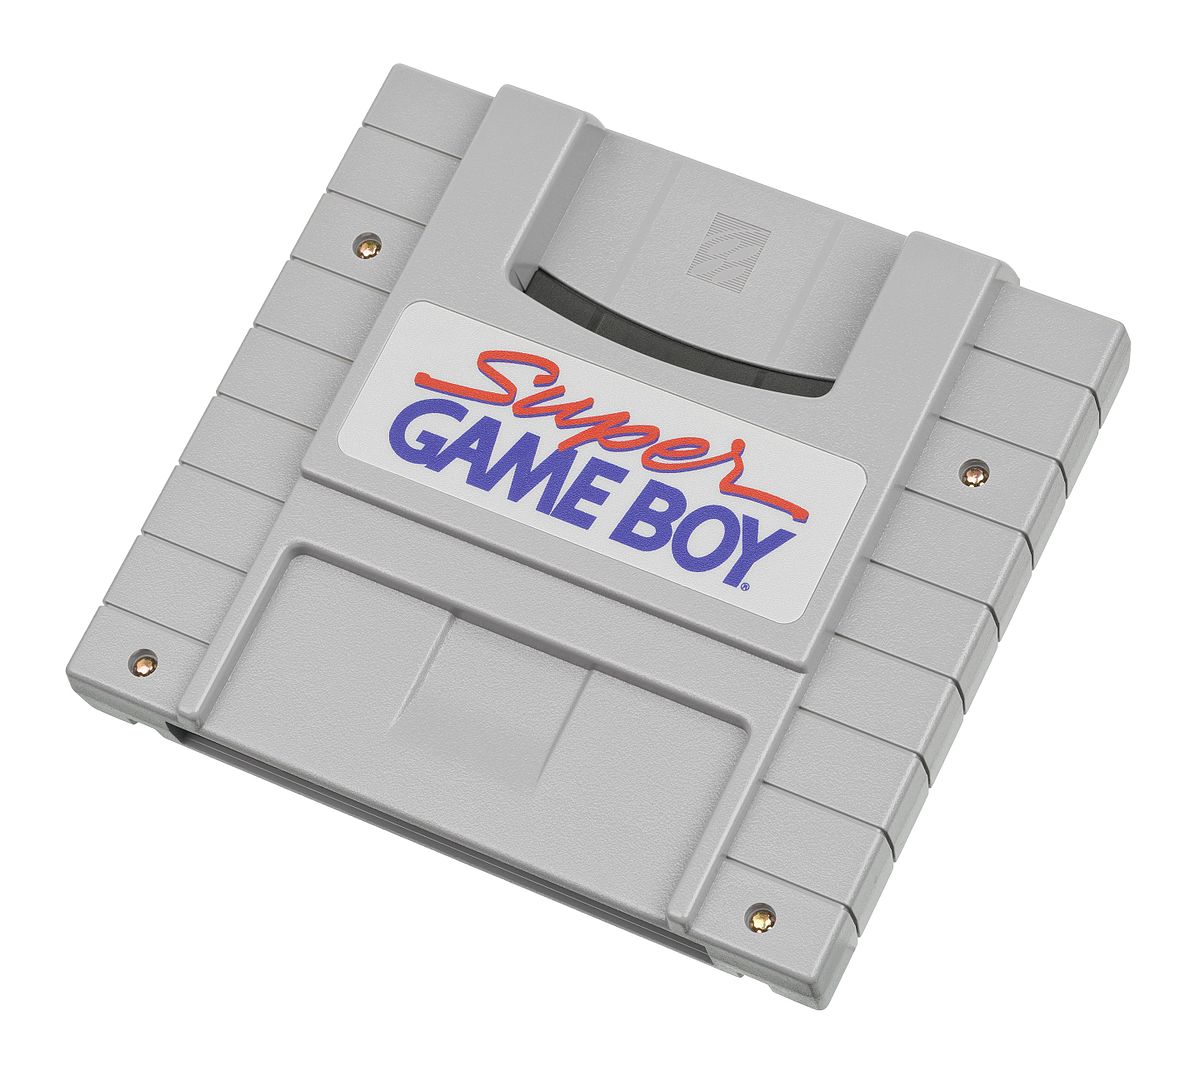 Amazing Game Boy Pictures & Backgrounds